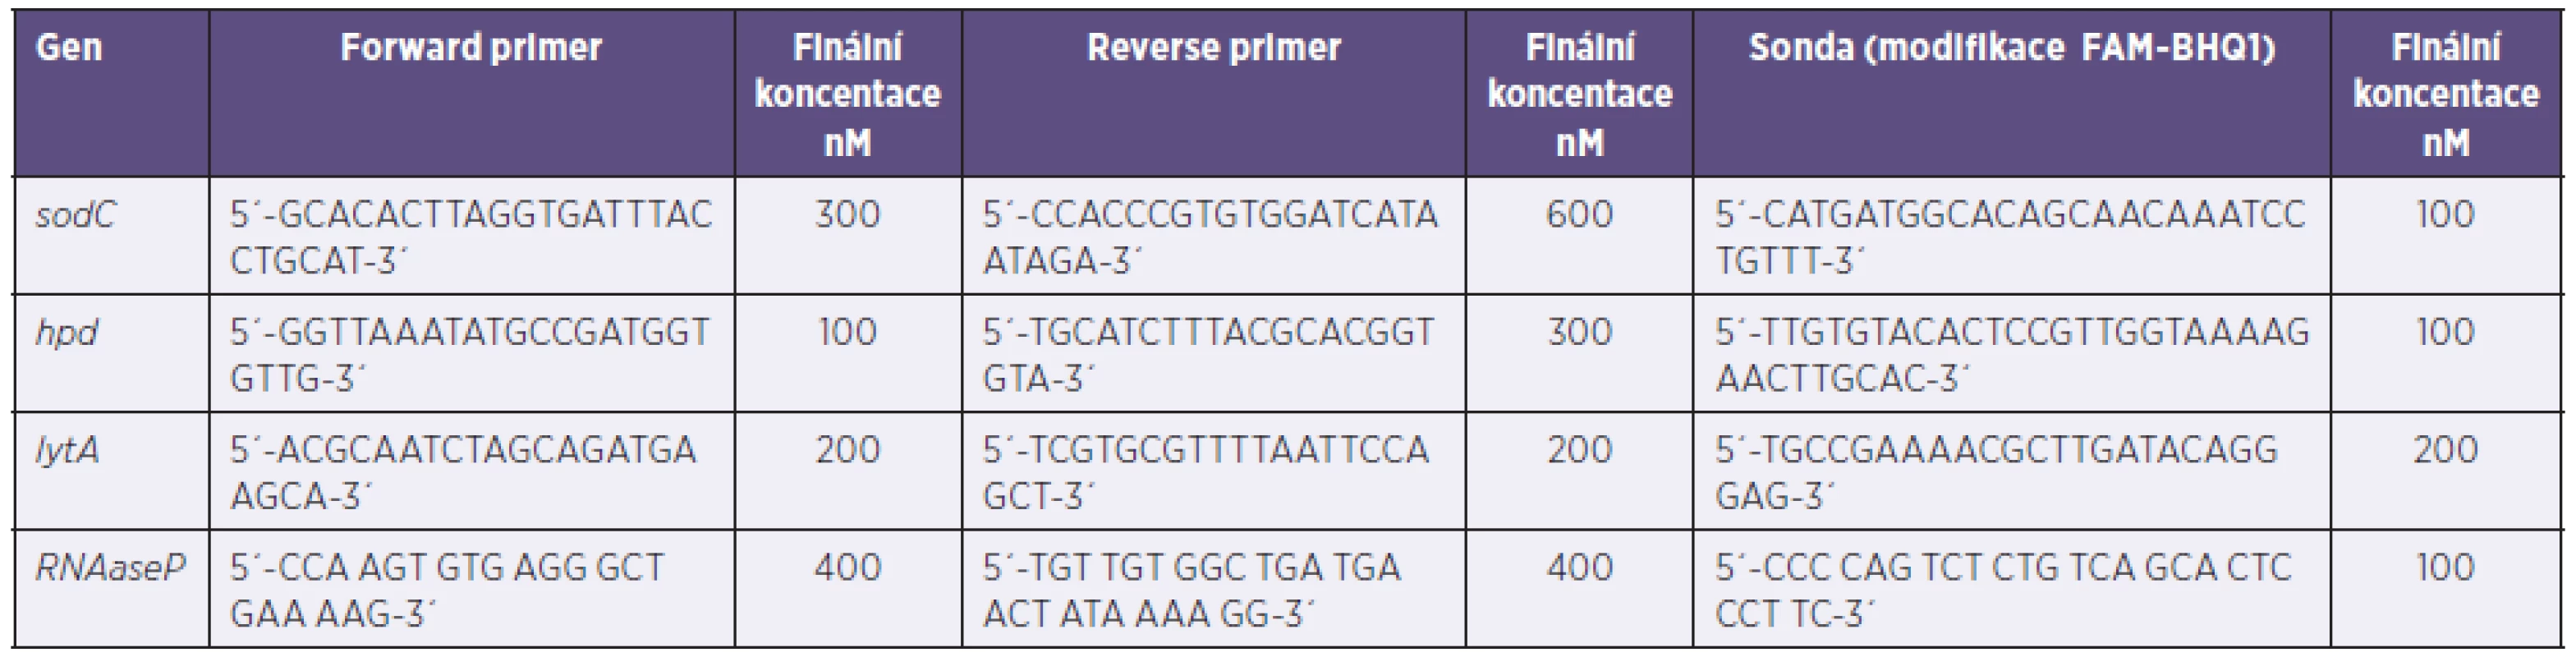 Primery a sondy pro rt-PCR
Table 2. Primers and probes for rt-PCR